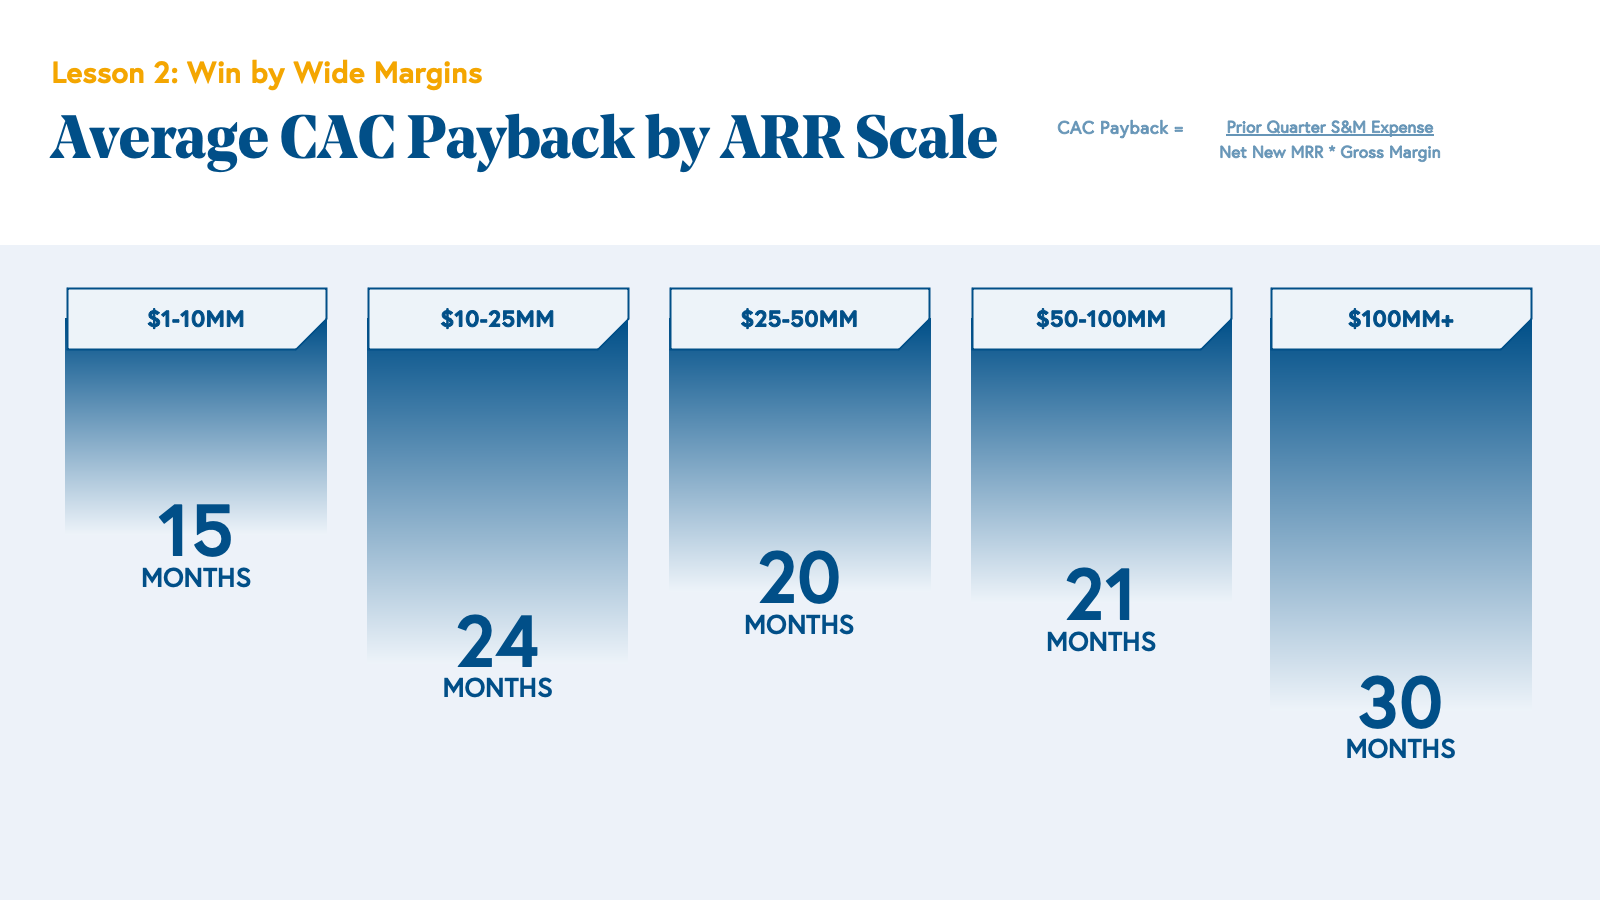 CAC Payback Period